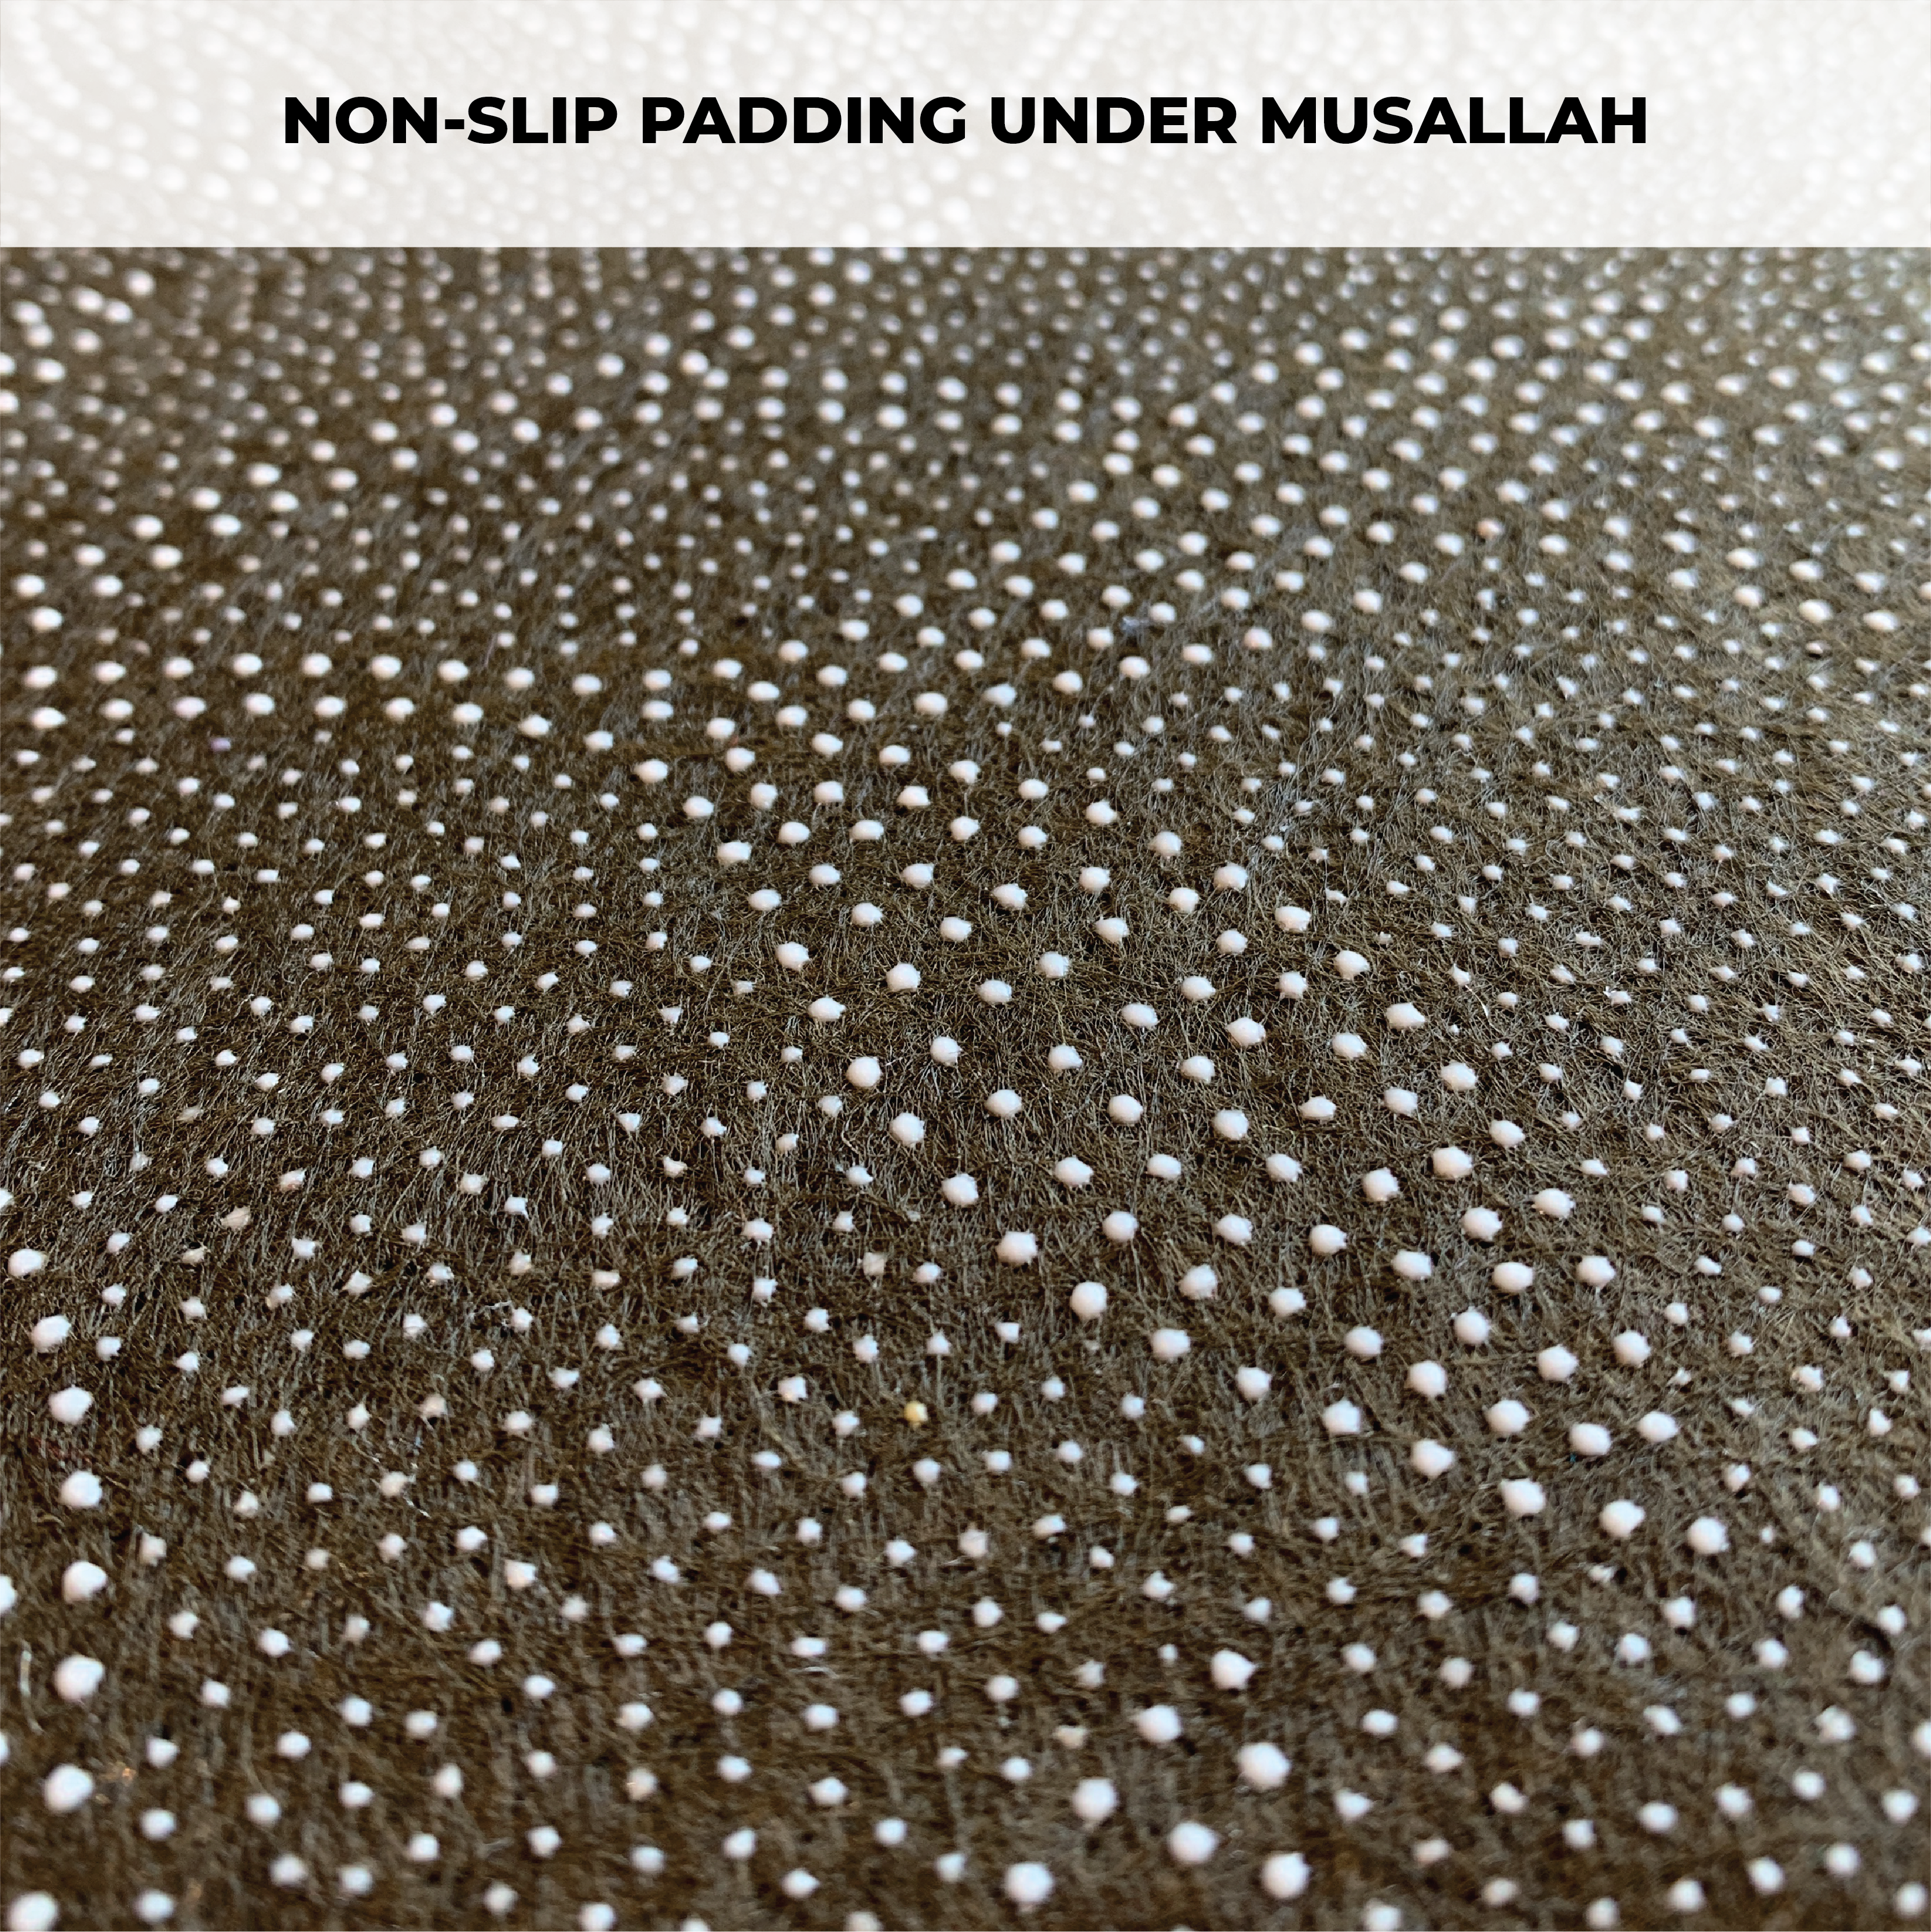 Designs Padded Soft-Touch Non-Slip Musallahs (2 Designs)